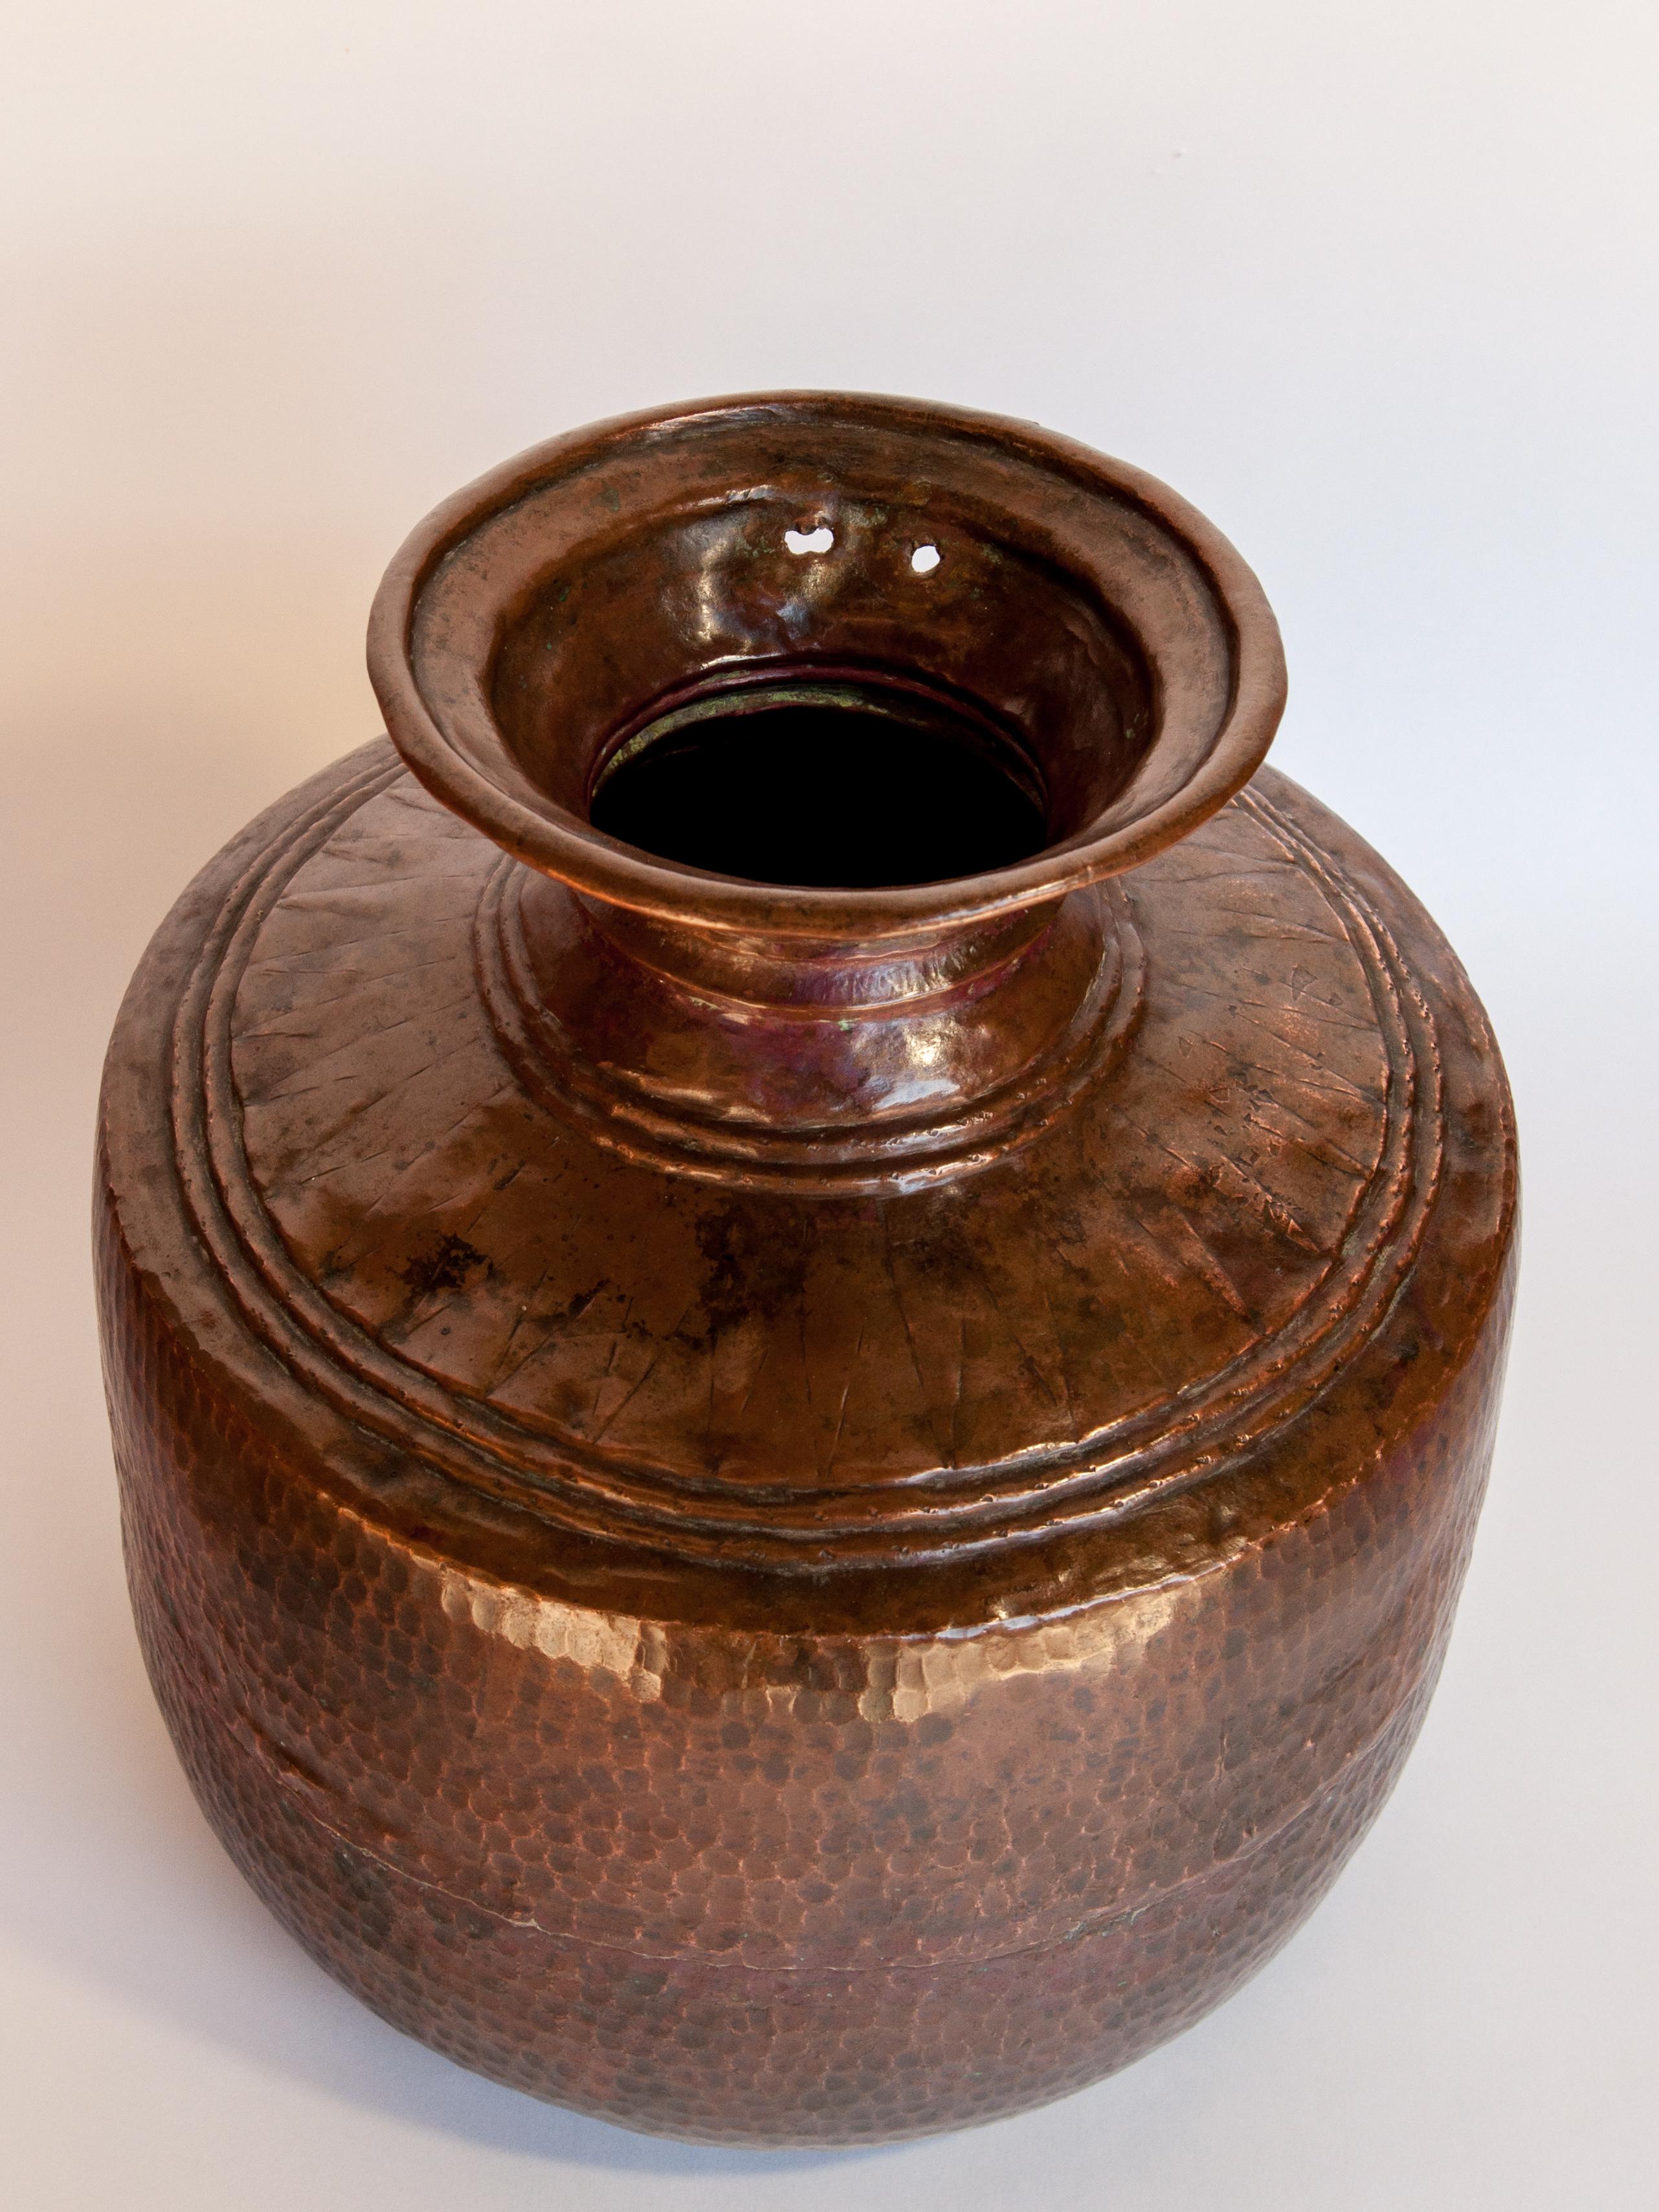 Metalwork Vintage Copper Water Pot, Hand Hammered, from Nepal, Mid-20th Century